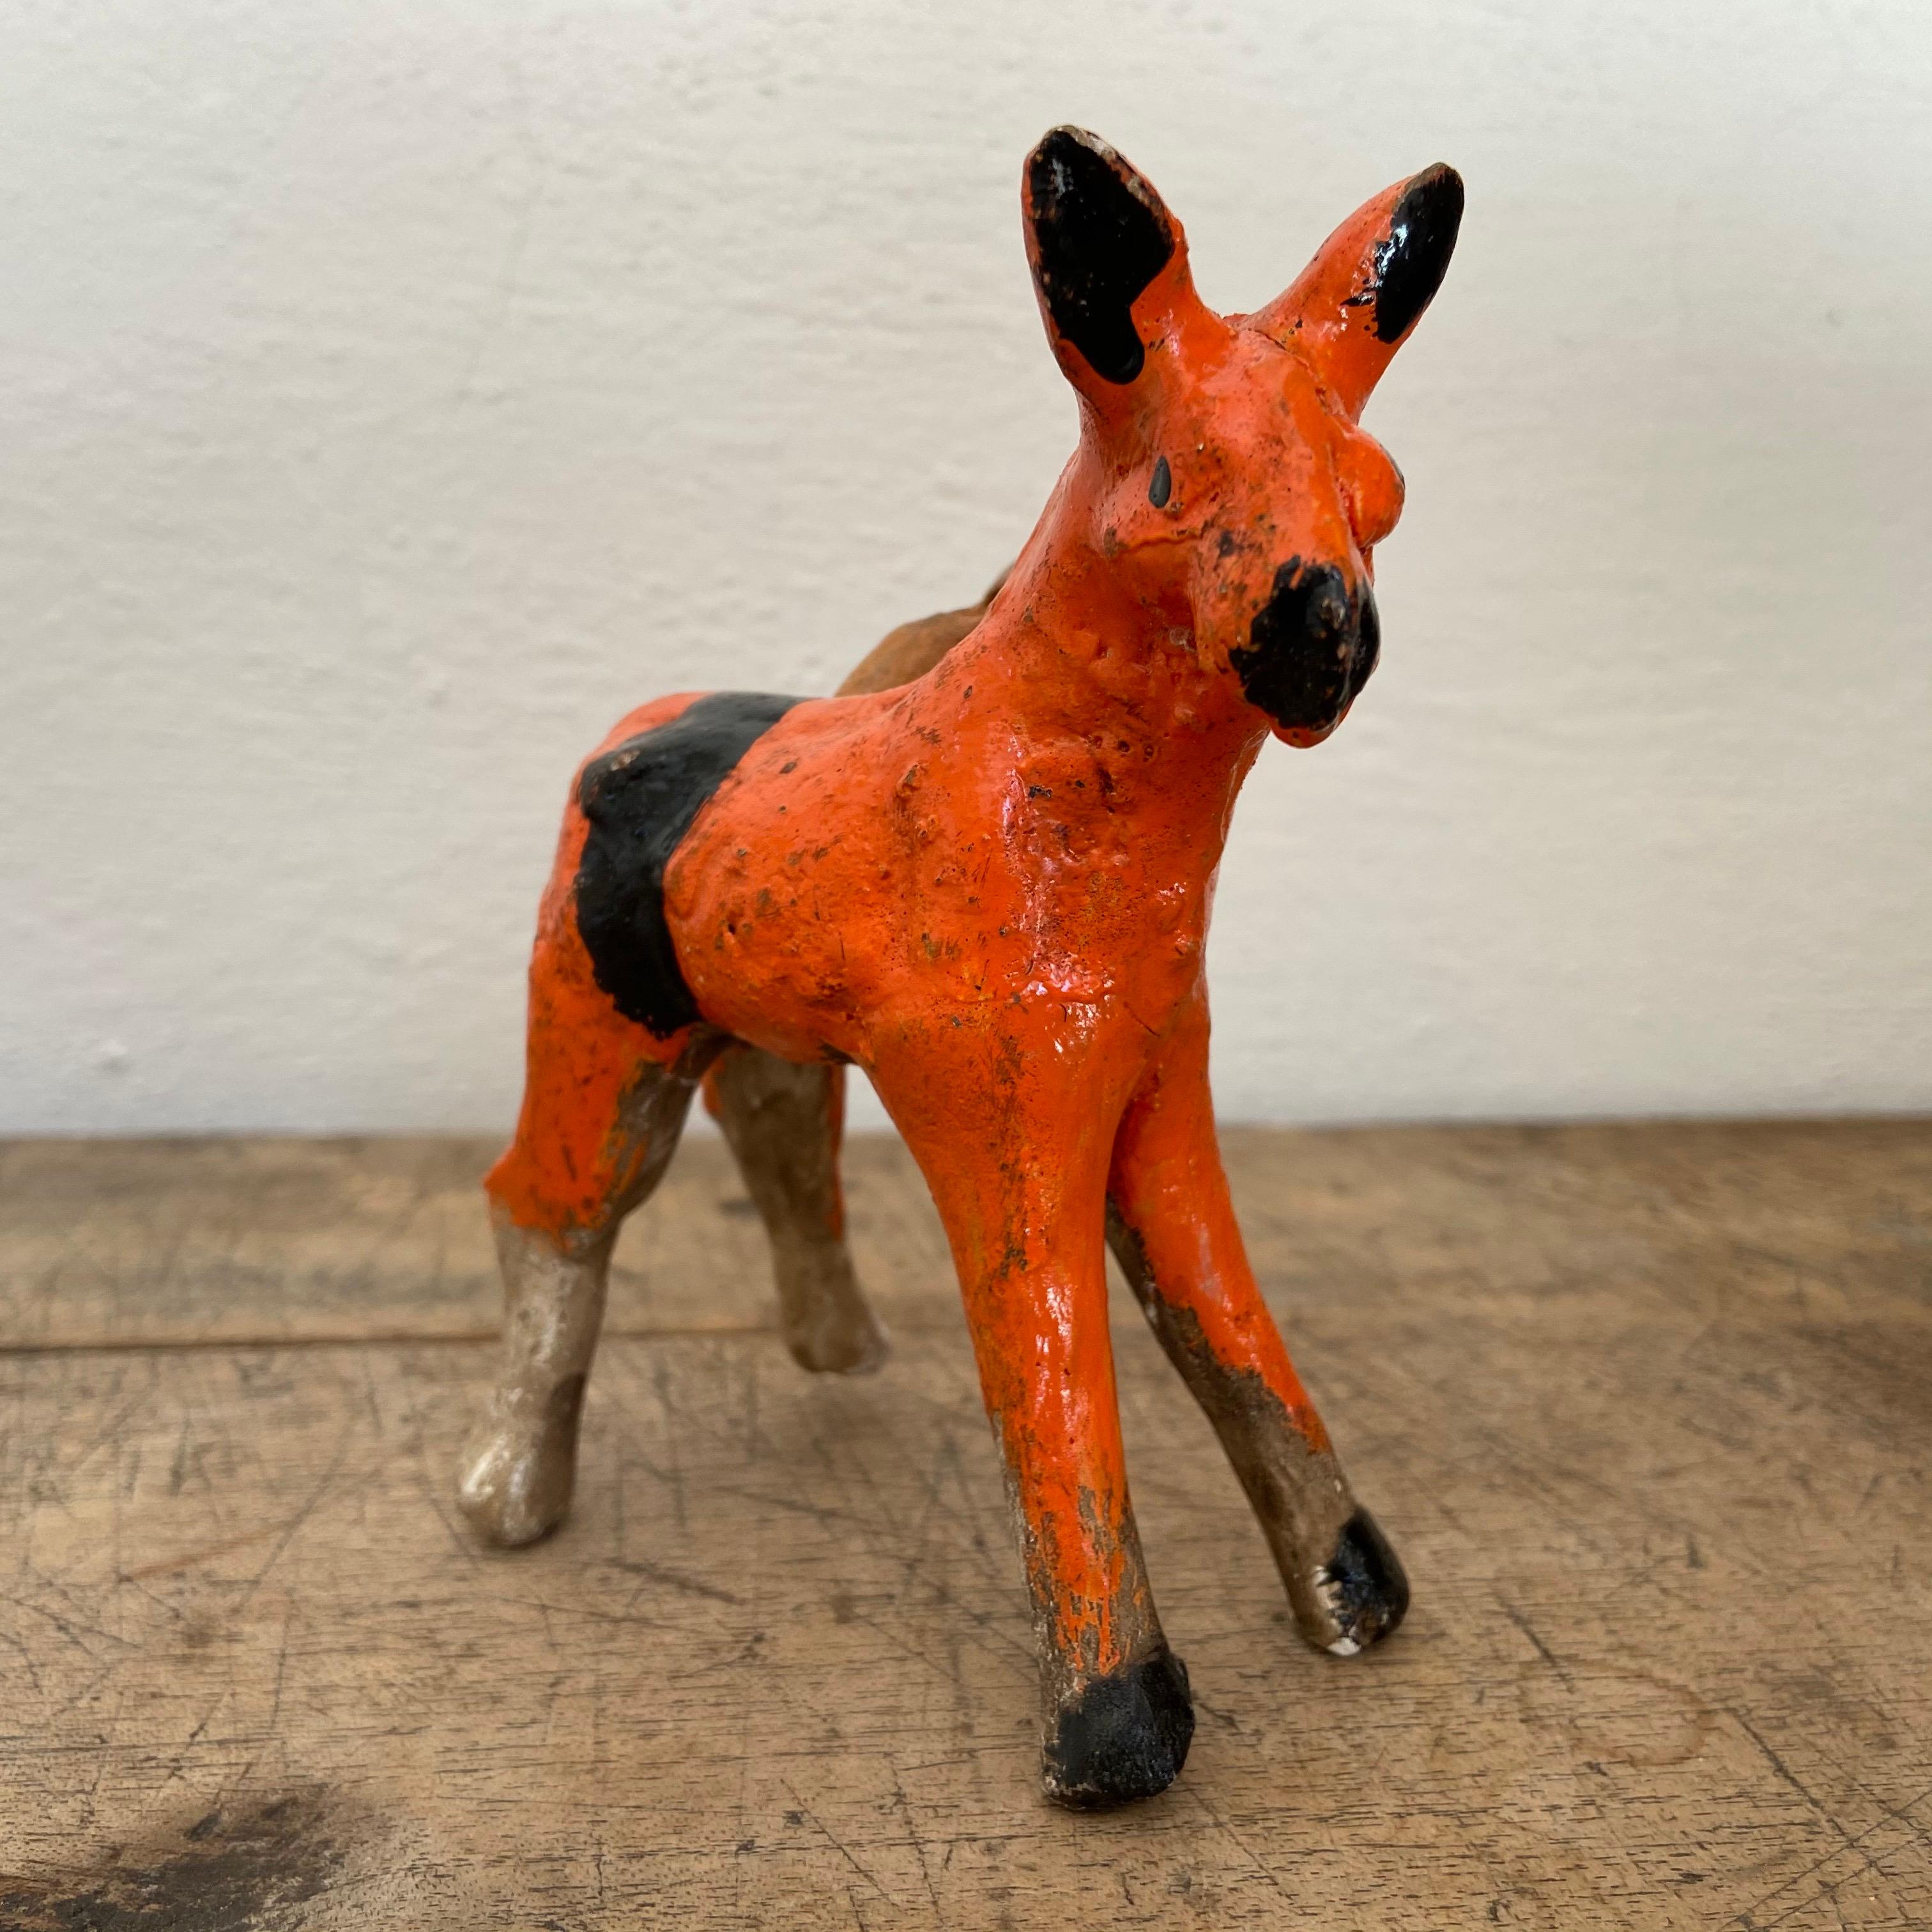 Hand-Crafted Ceramic Horse Figure Whistle from Mexico, 1980s